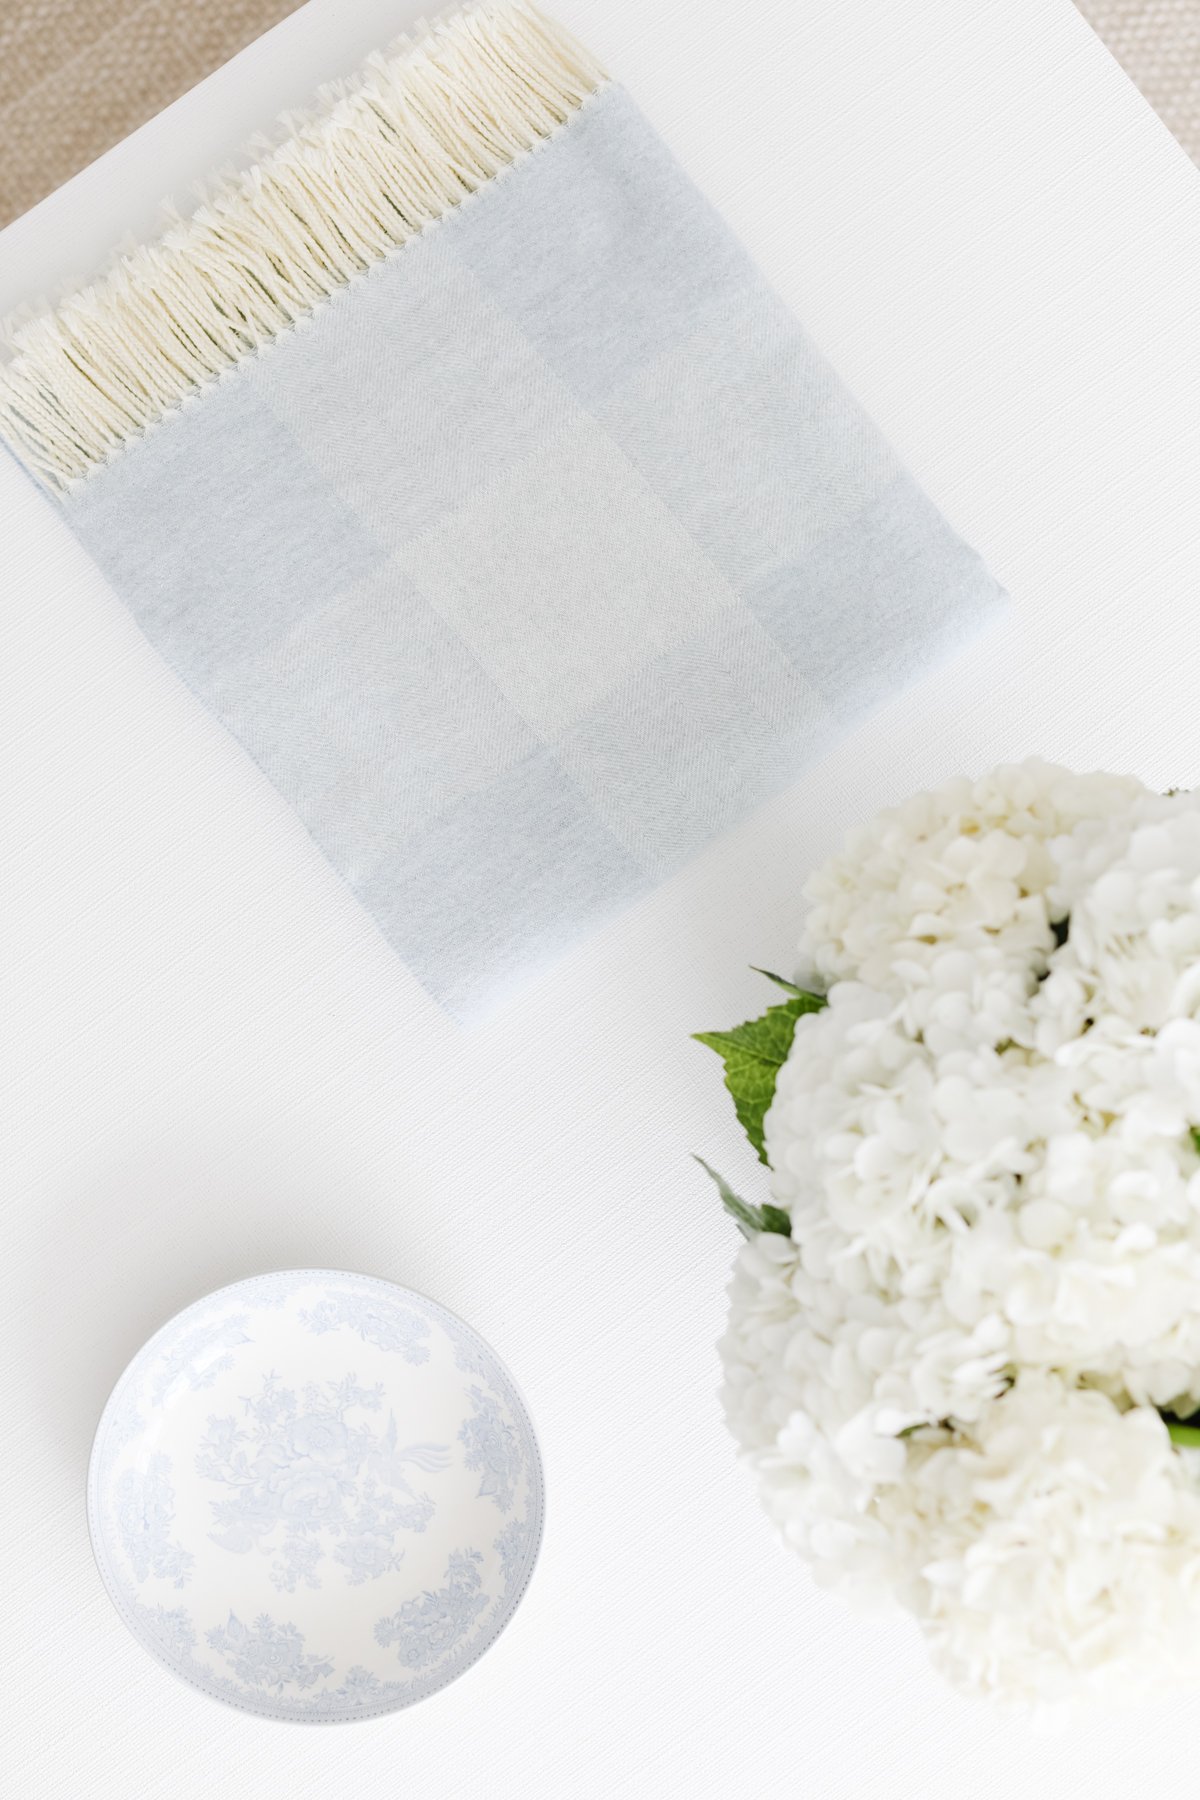 Top-down view of a light blue and white checkered throw blanket with fringes, a white and blue decorative plate, and a bouquet of white hydrangeas on a white surface.